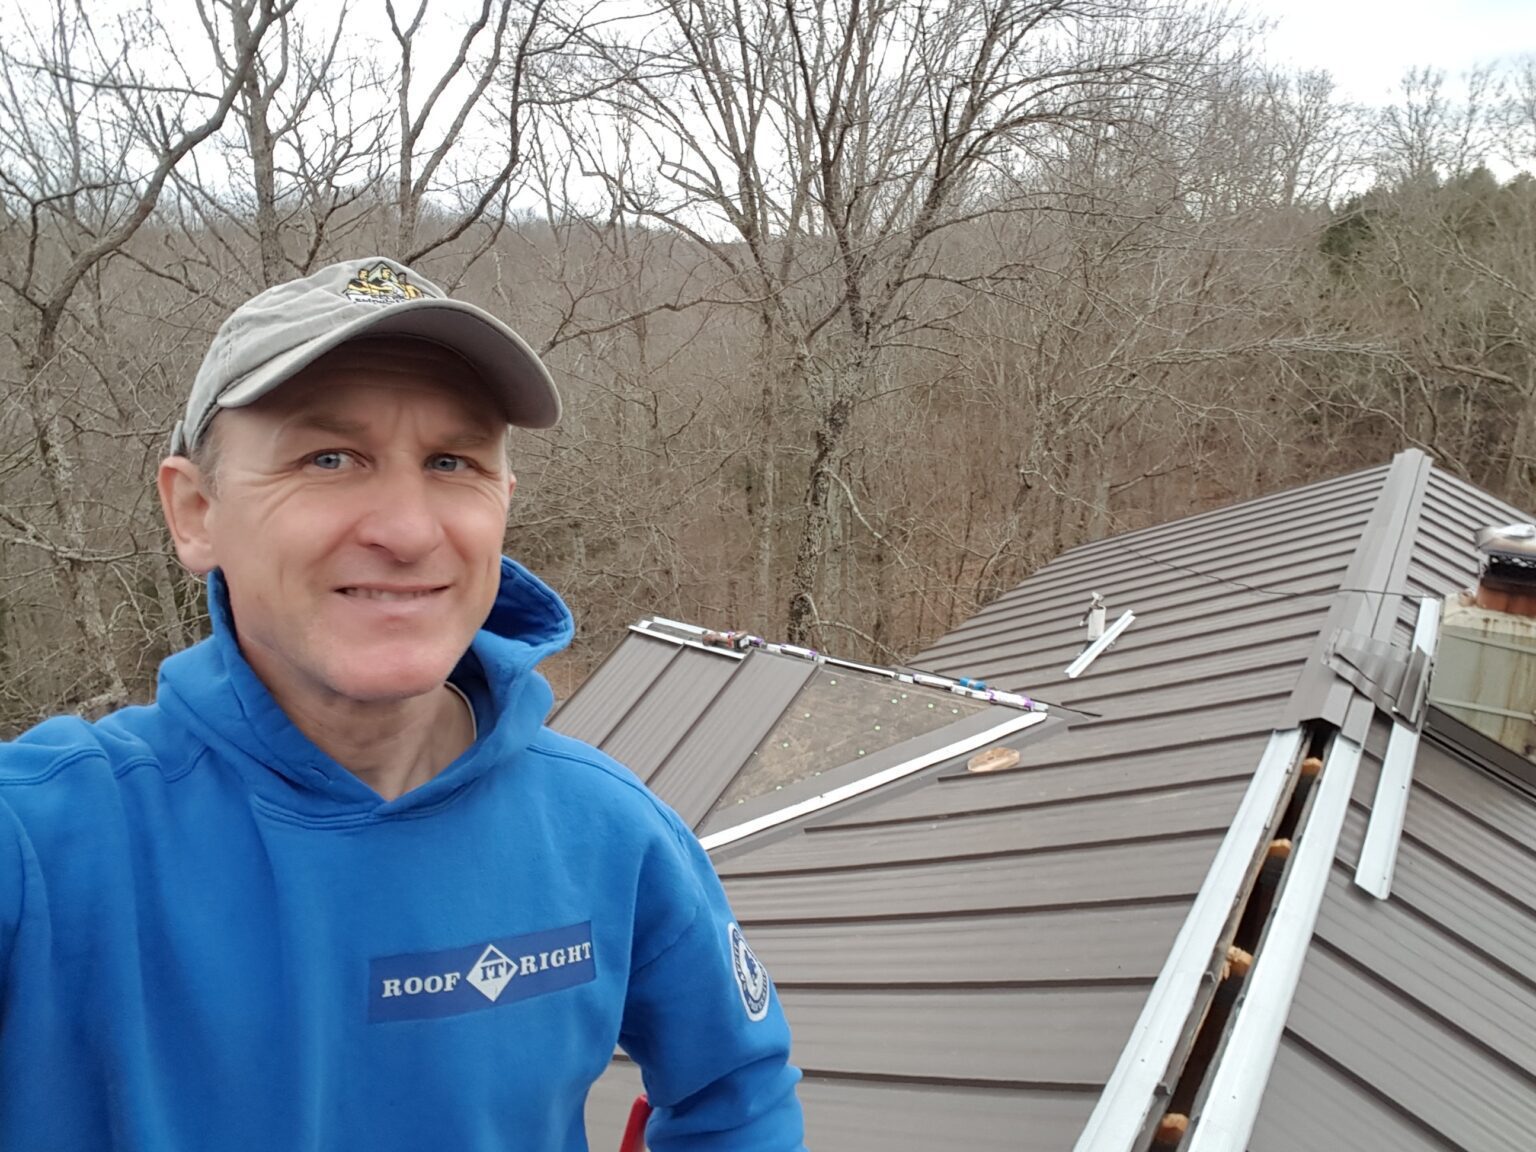 metal-roofing-options-roof-it-right-serving-louisville-ky